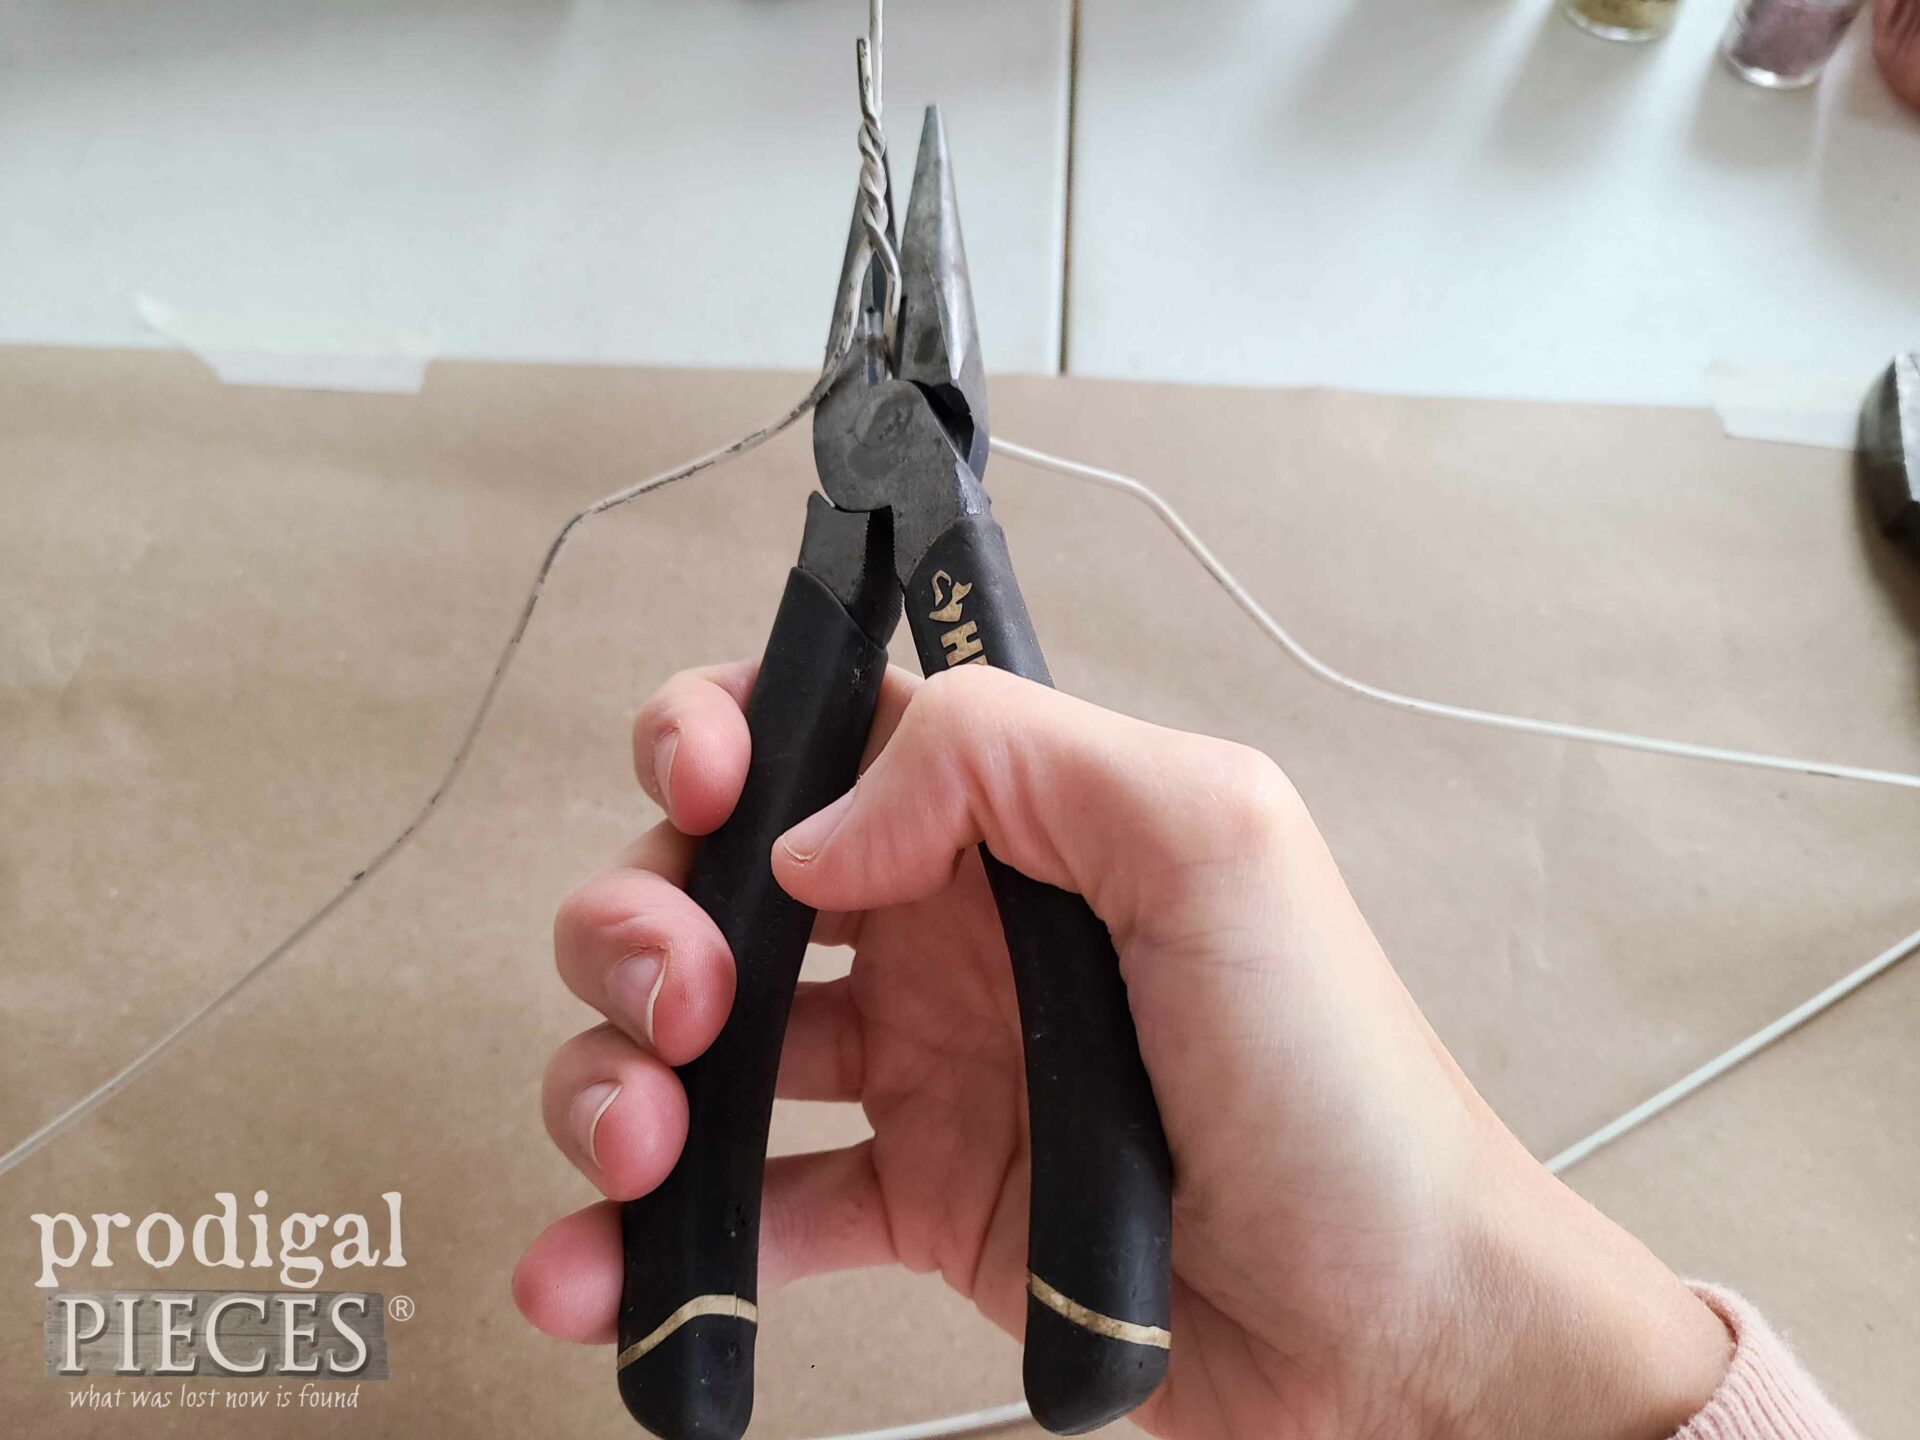 Clipping Wire Hanger for Repurposed Christmas Ornaments | prodigalpieces.com #prodigalpieces